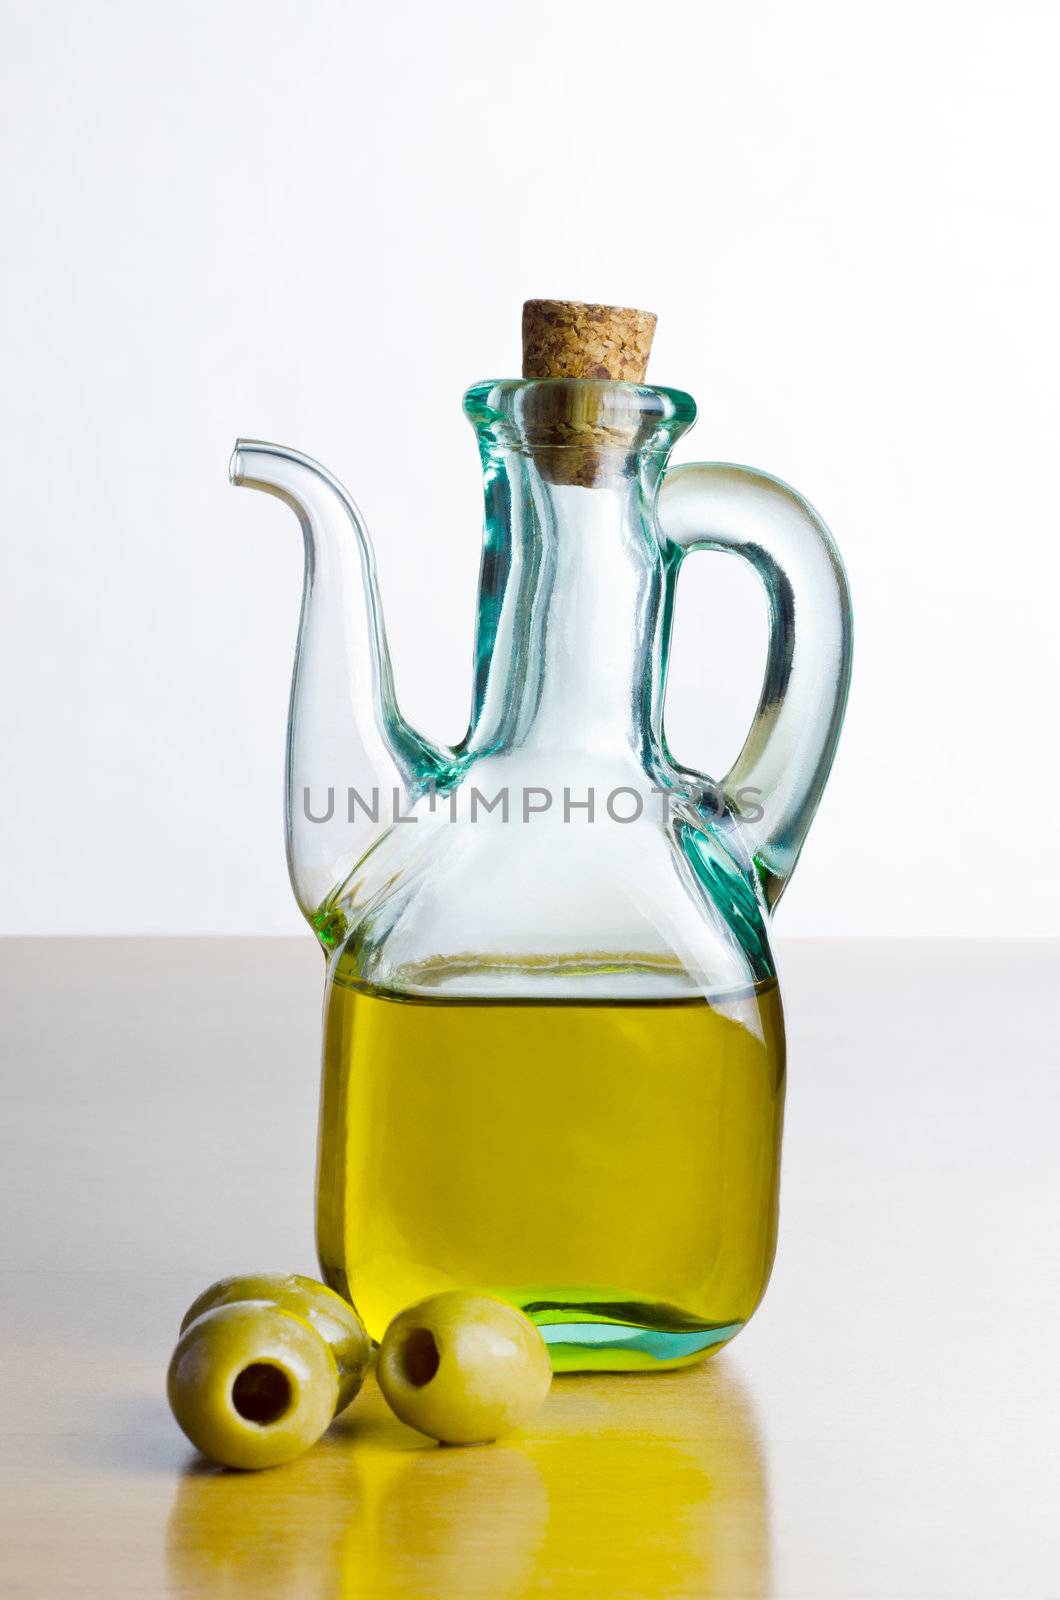 A corked glass jug of olive oil, with pitted olives on a shiny wooden surface with an off-white background.